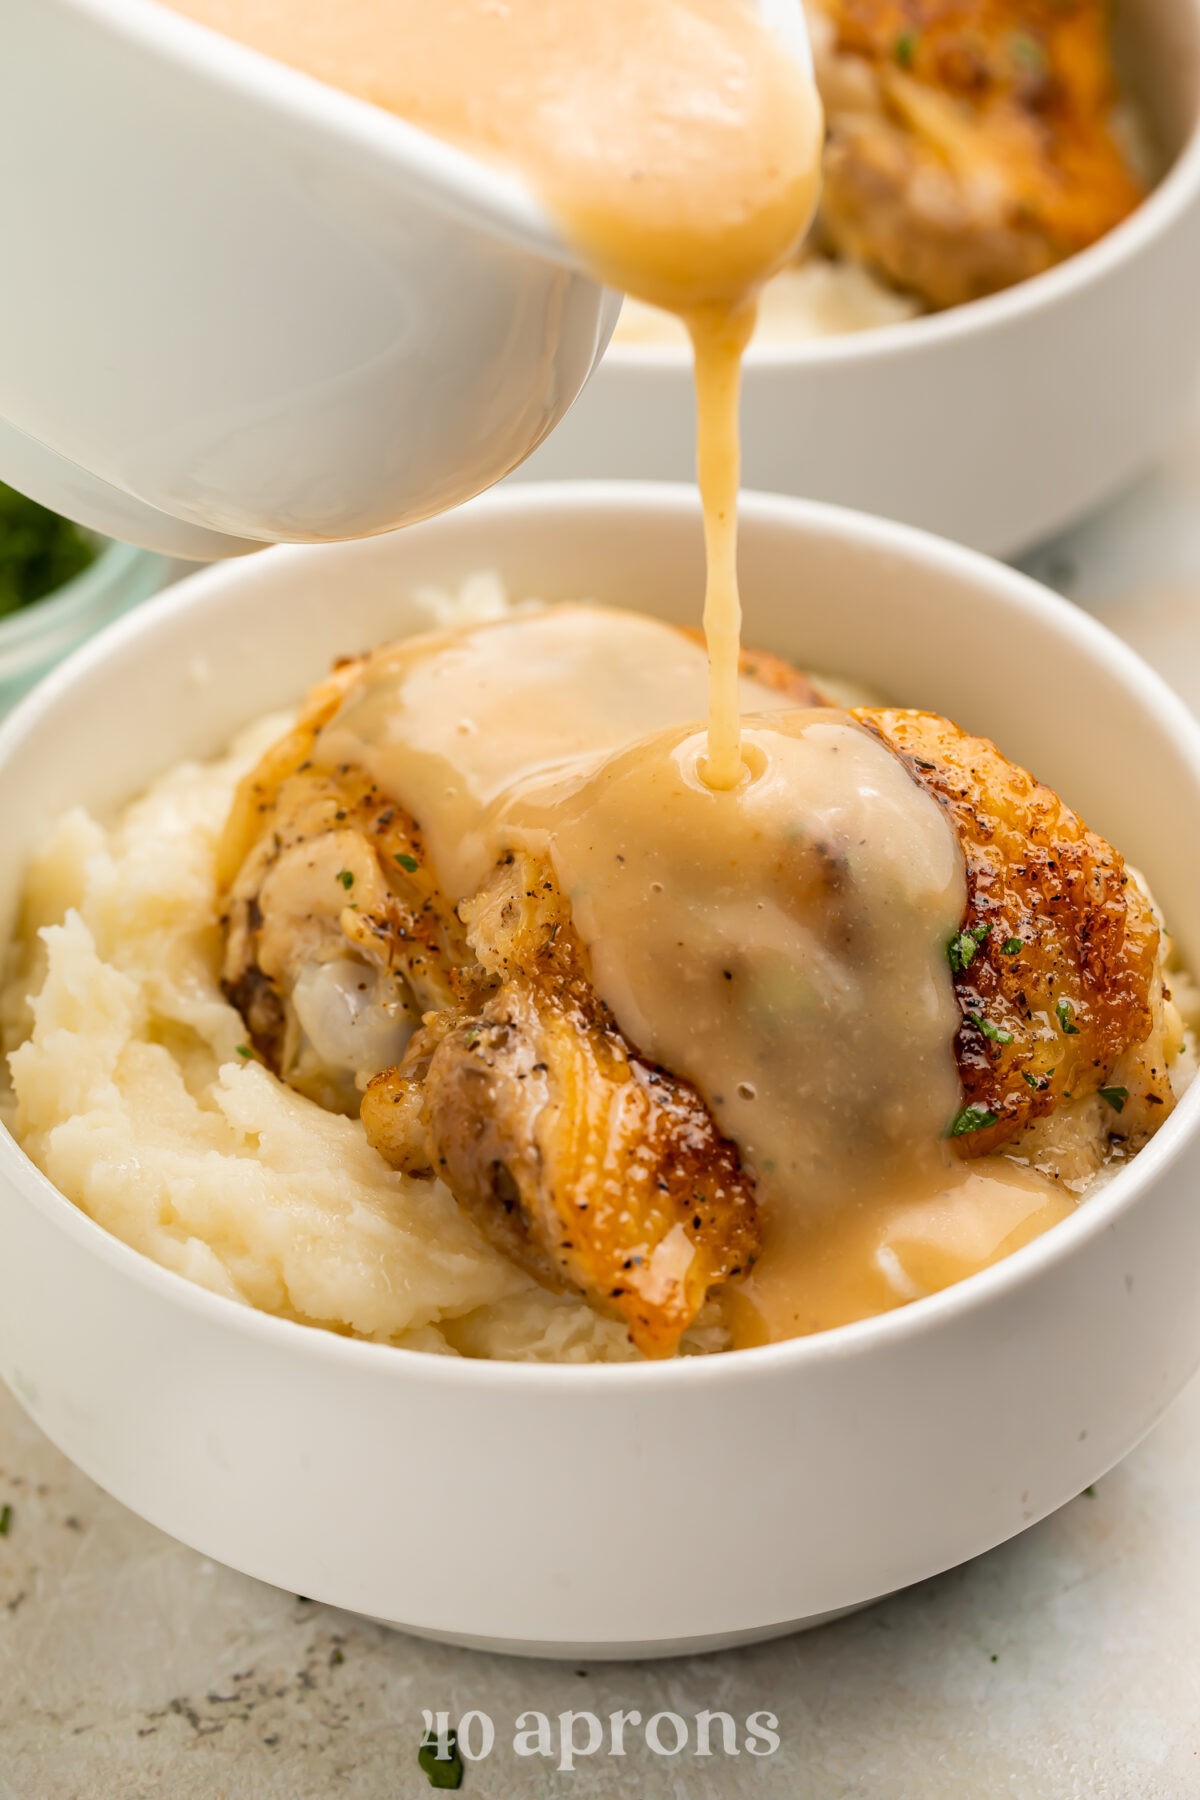 Gravy being poured over a perfectly cooked Instant Pot chicken thigh atop a bed of mashed potatoes in a bowl.